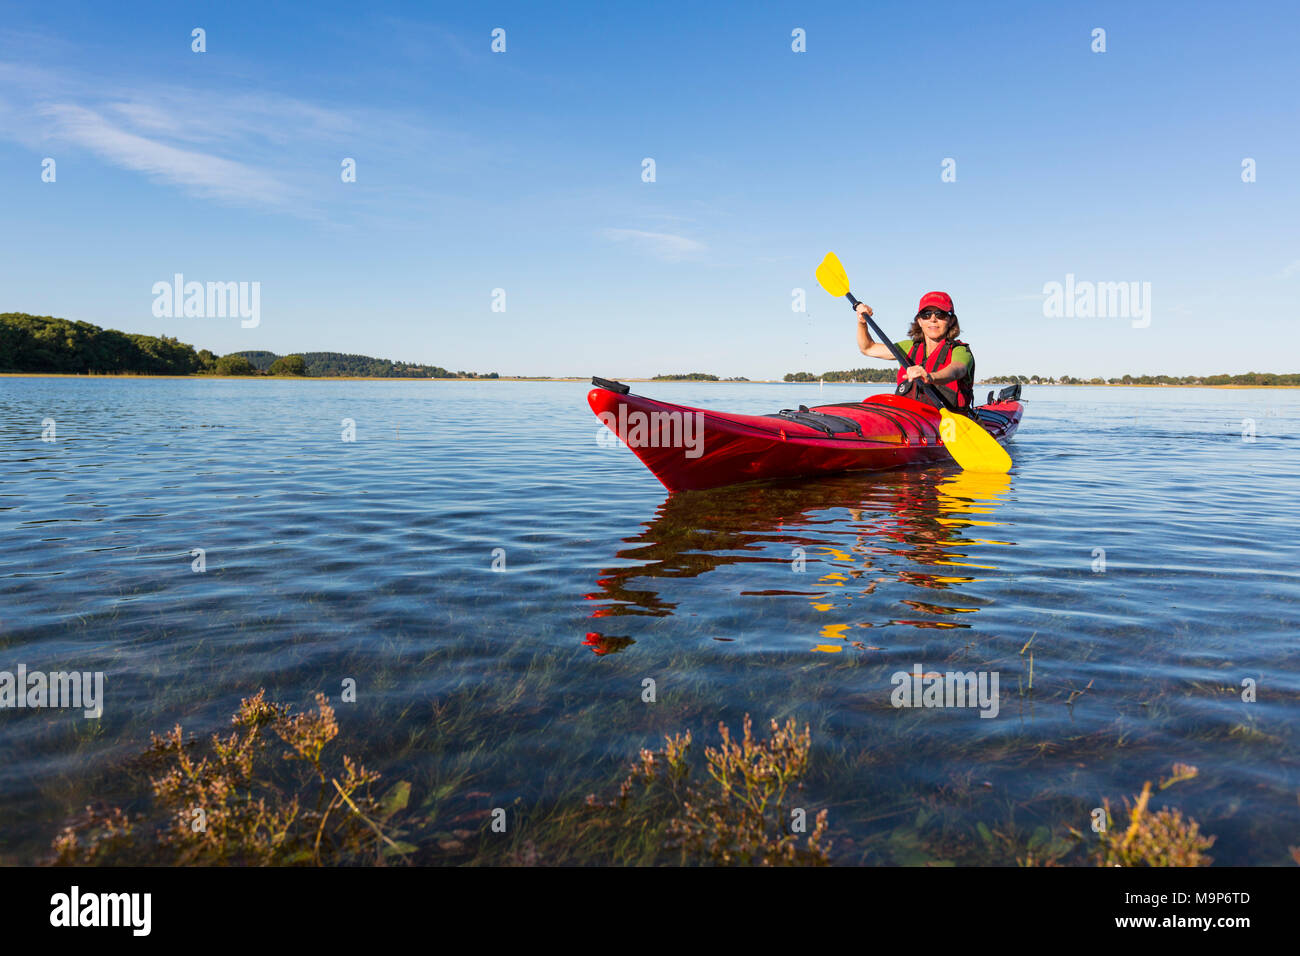 Kayaker on Essex River at Cox Reservation in Essex, Massachusetts Stock Photo